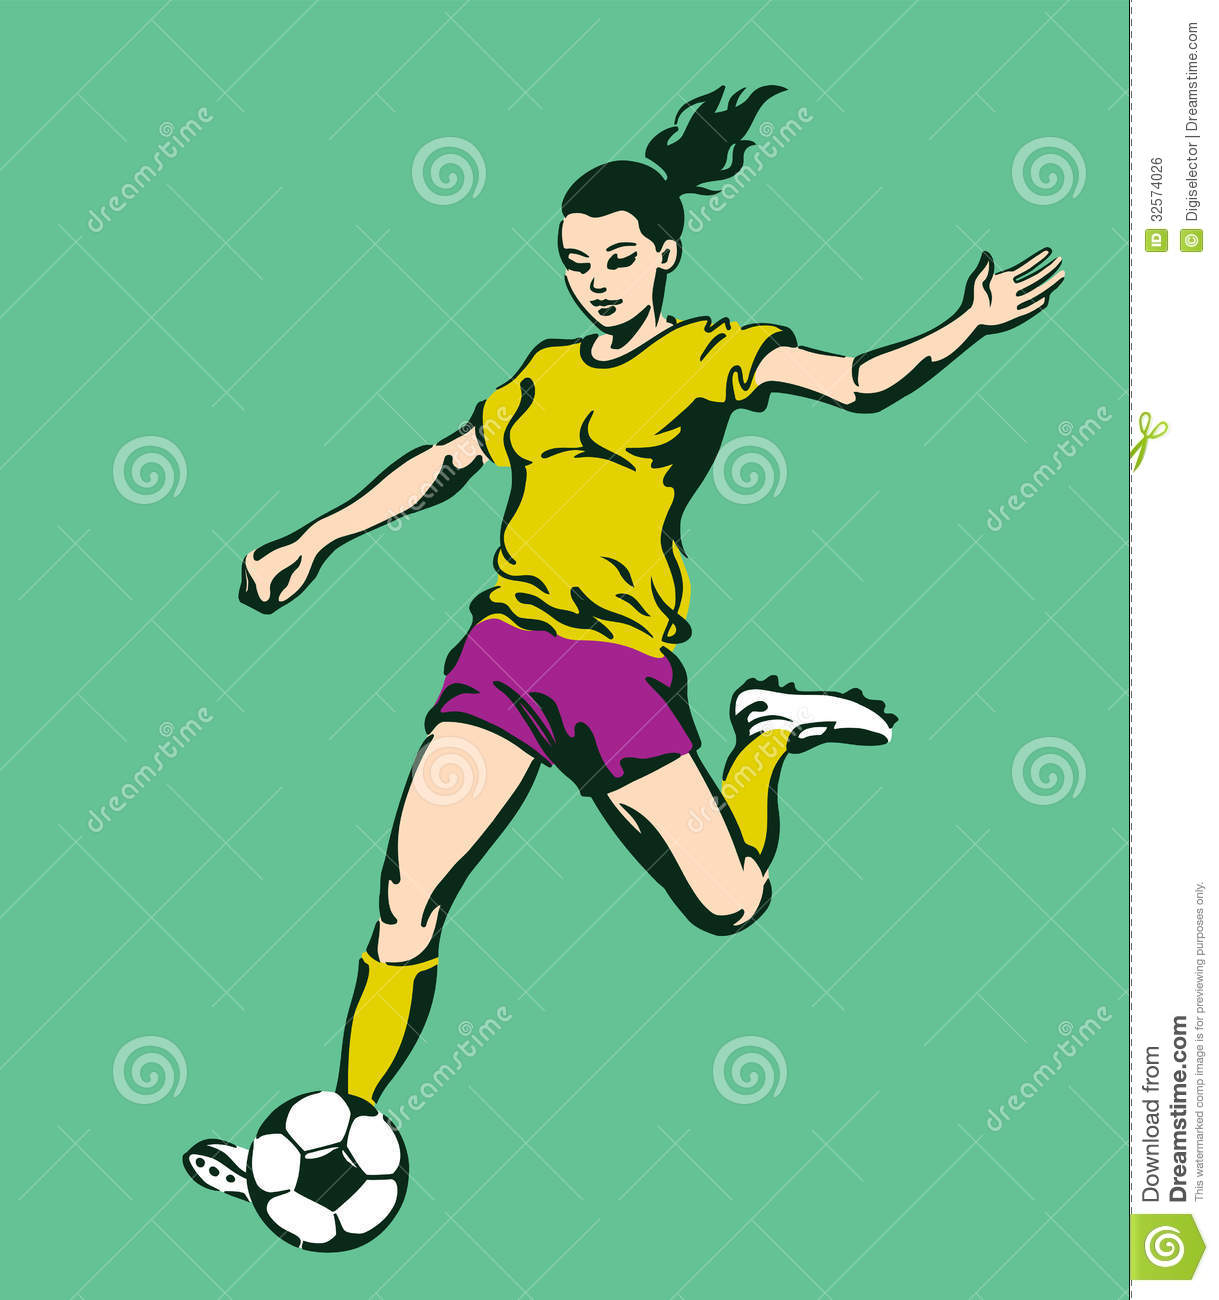 Soccer Football Female Player Royalty Free Stock Image   Image